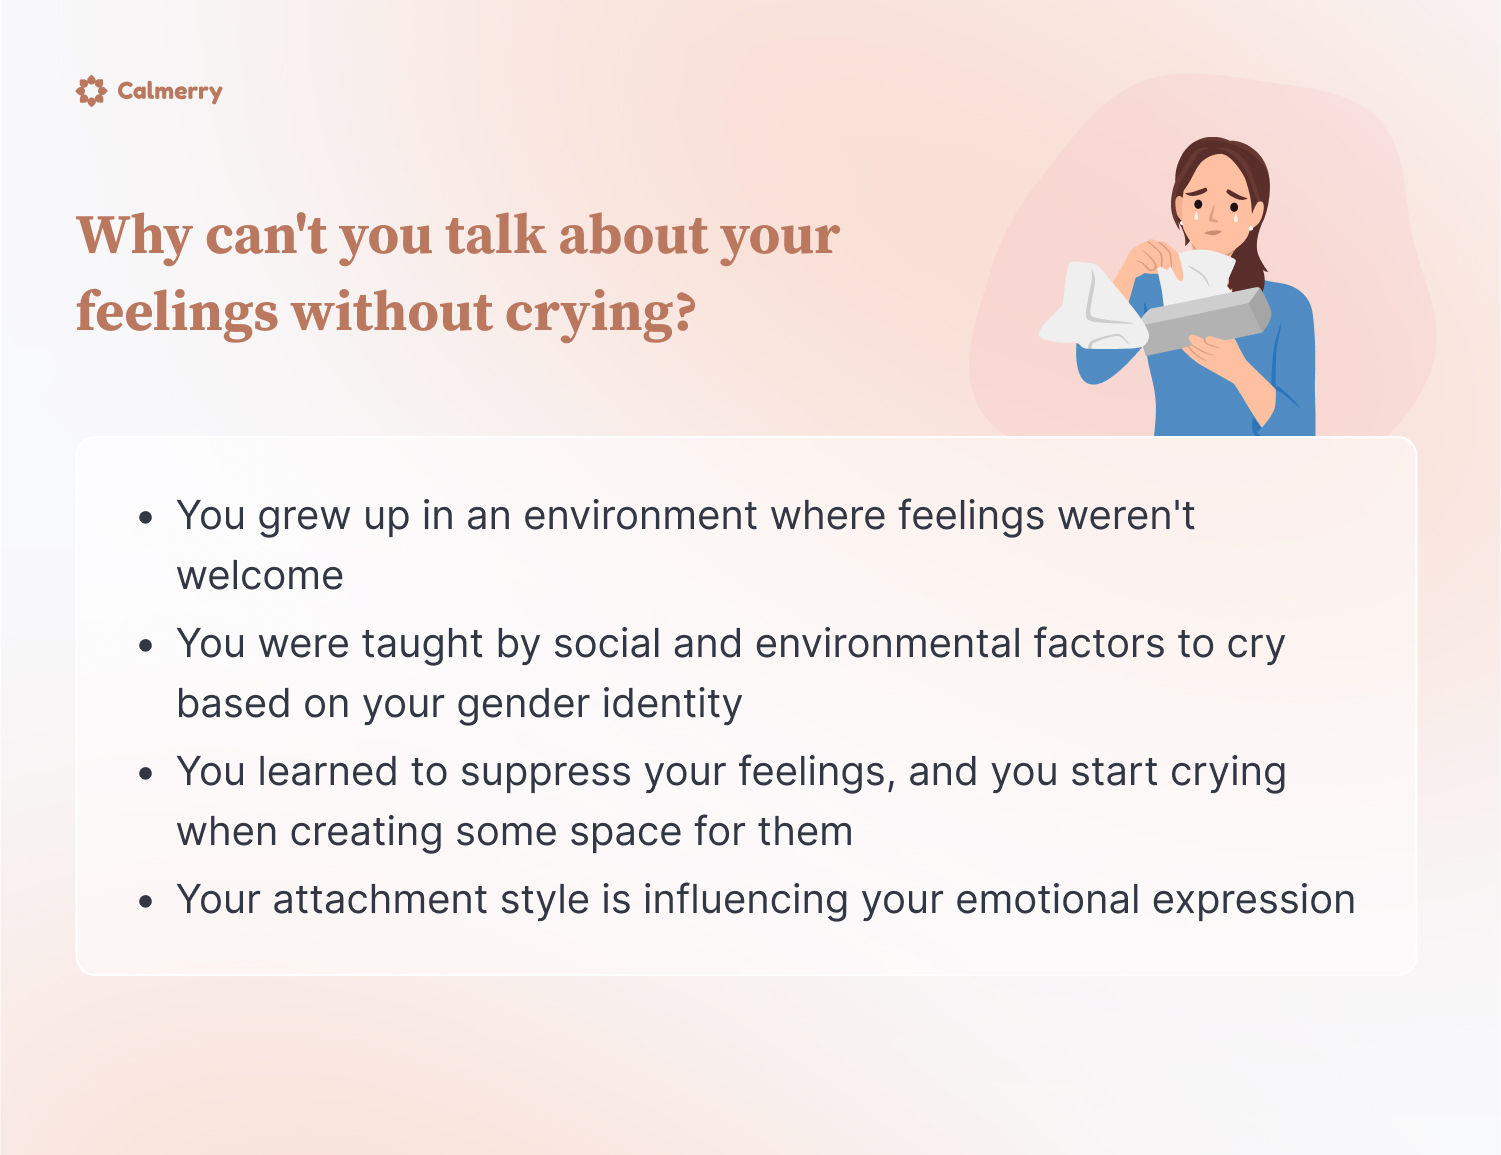 Why can't you talk about your feelings without crying?
You grew up in an environment where feelings weren't welcome
You were taught by social and environmental factors to cry based on your gender identity
You learned to suppress your feelings, and you start crying when creating some space for them
Your attachment style is influencing your emotional expression